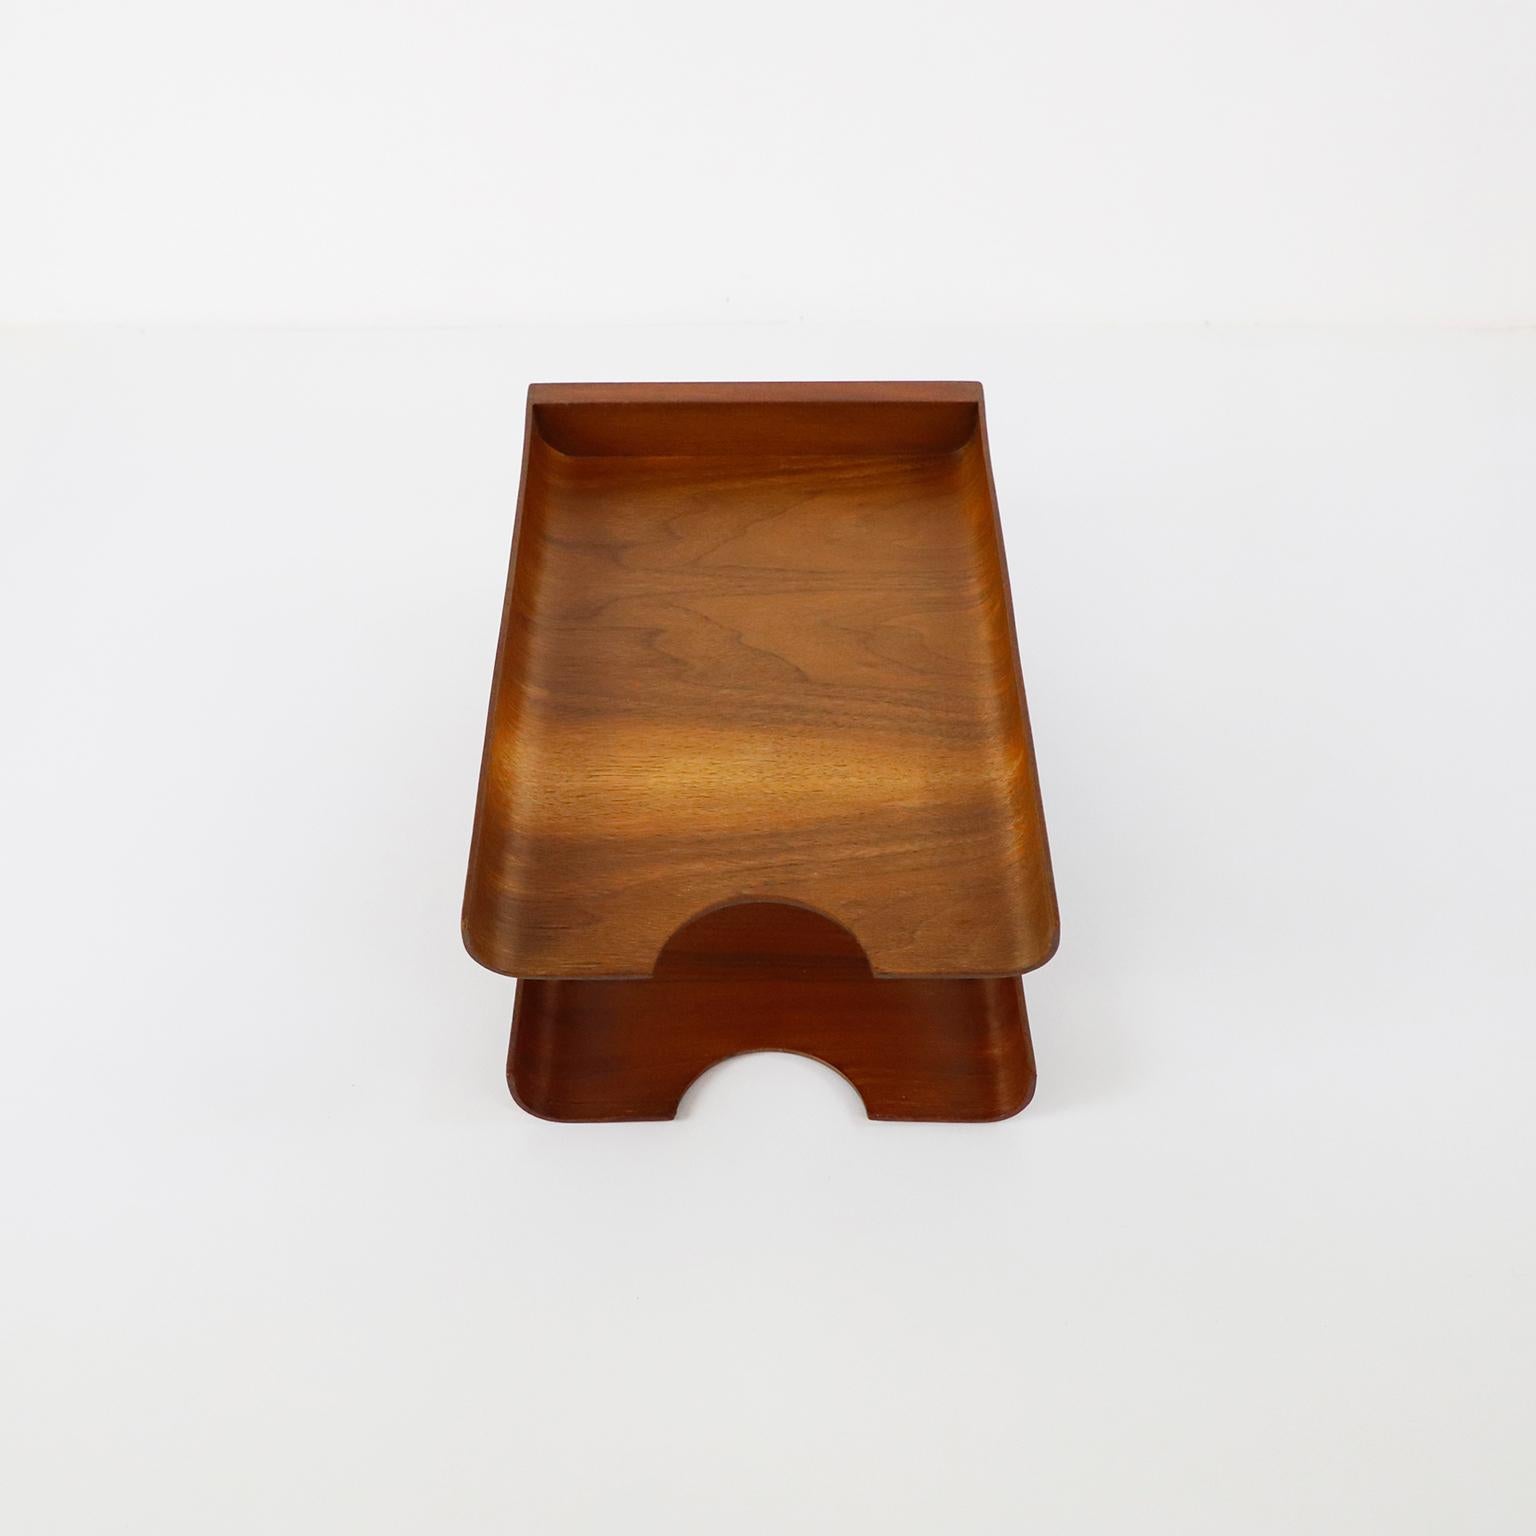 We offer this Mid-Century Modern desk office tray, clean design in two levels made by IRGSA, circa 1970.